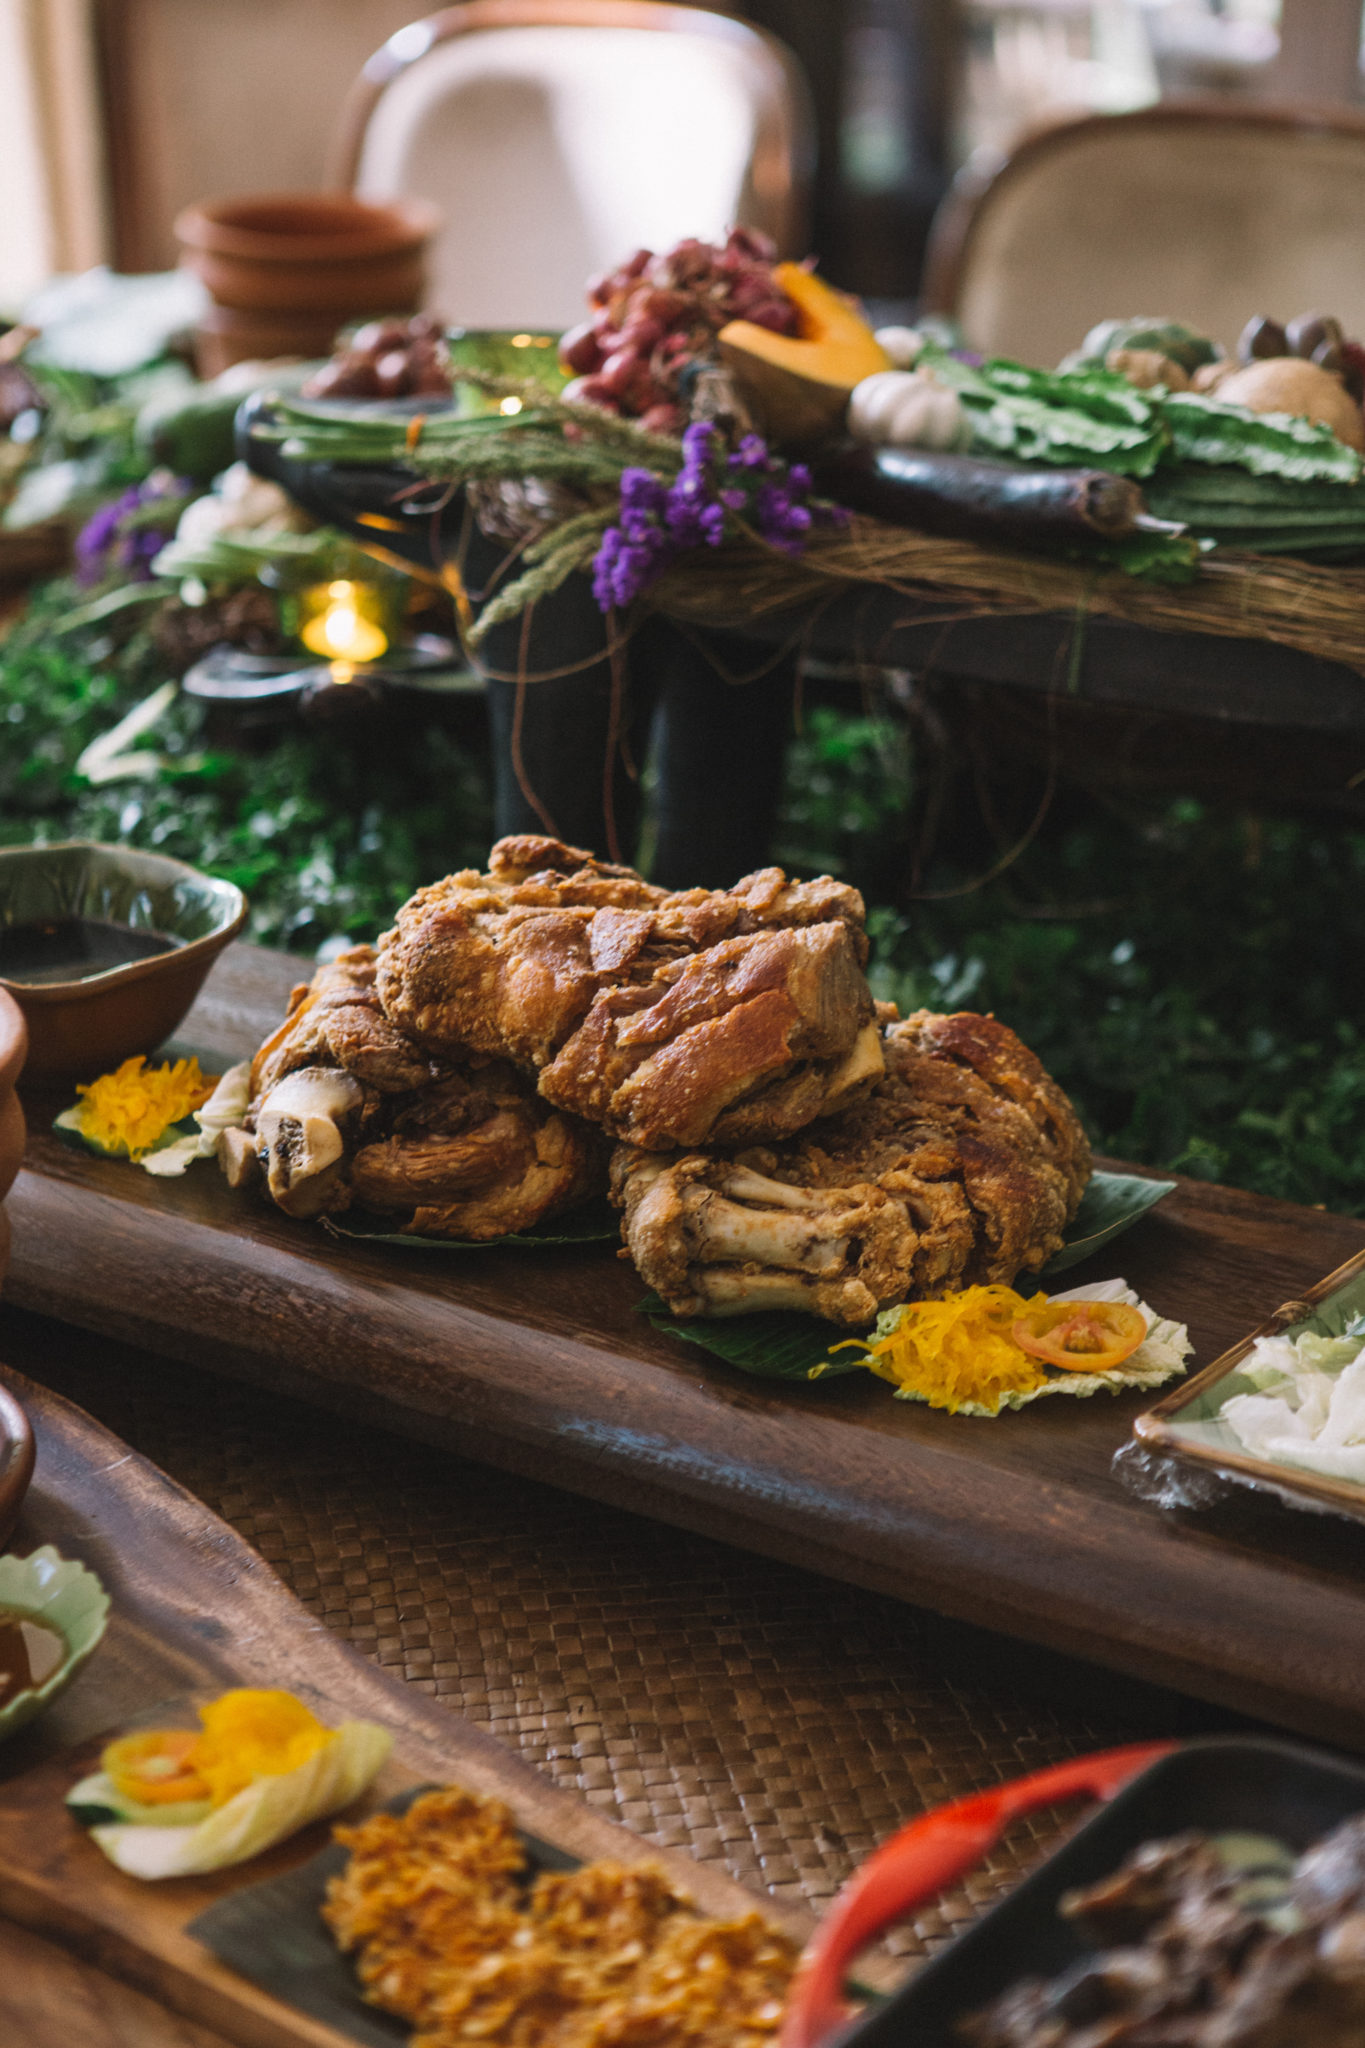 We have Happy Ongpauco-Tiu’s father Rod to thank for the invention of crispy pata